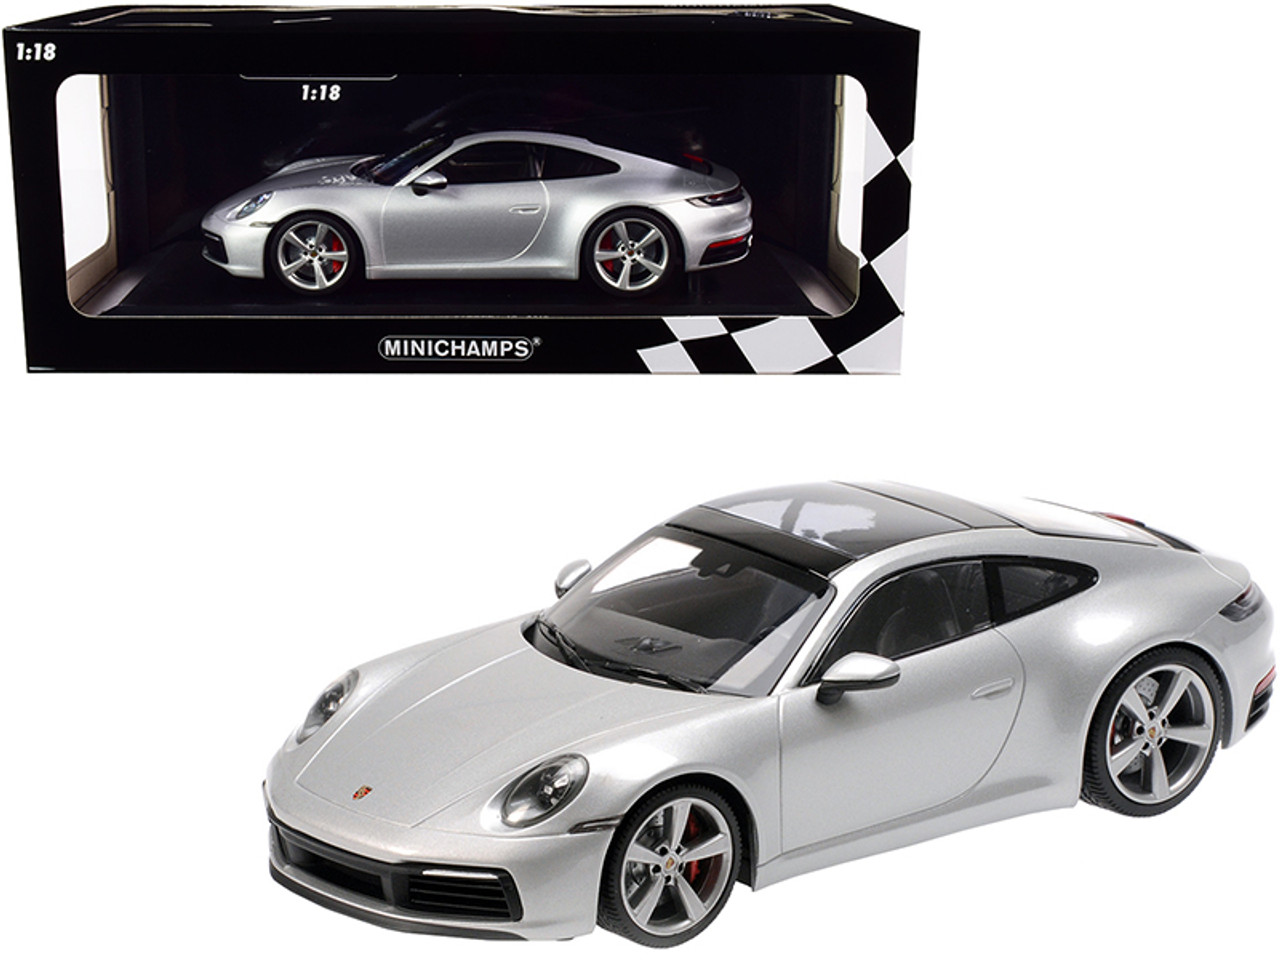 2019 Porsche 911 Carrera 4S Silver Metallic Limited Edition to 408 pieces Worldwide 1/18 Diecast Model Car by Minichamps